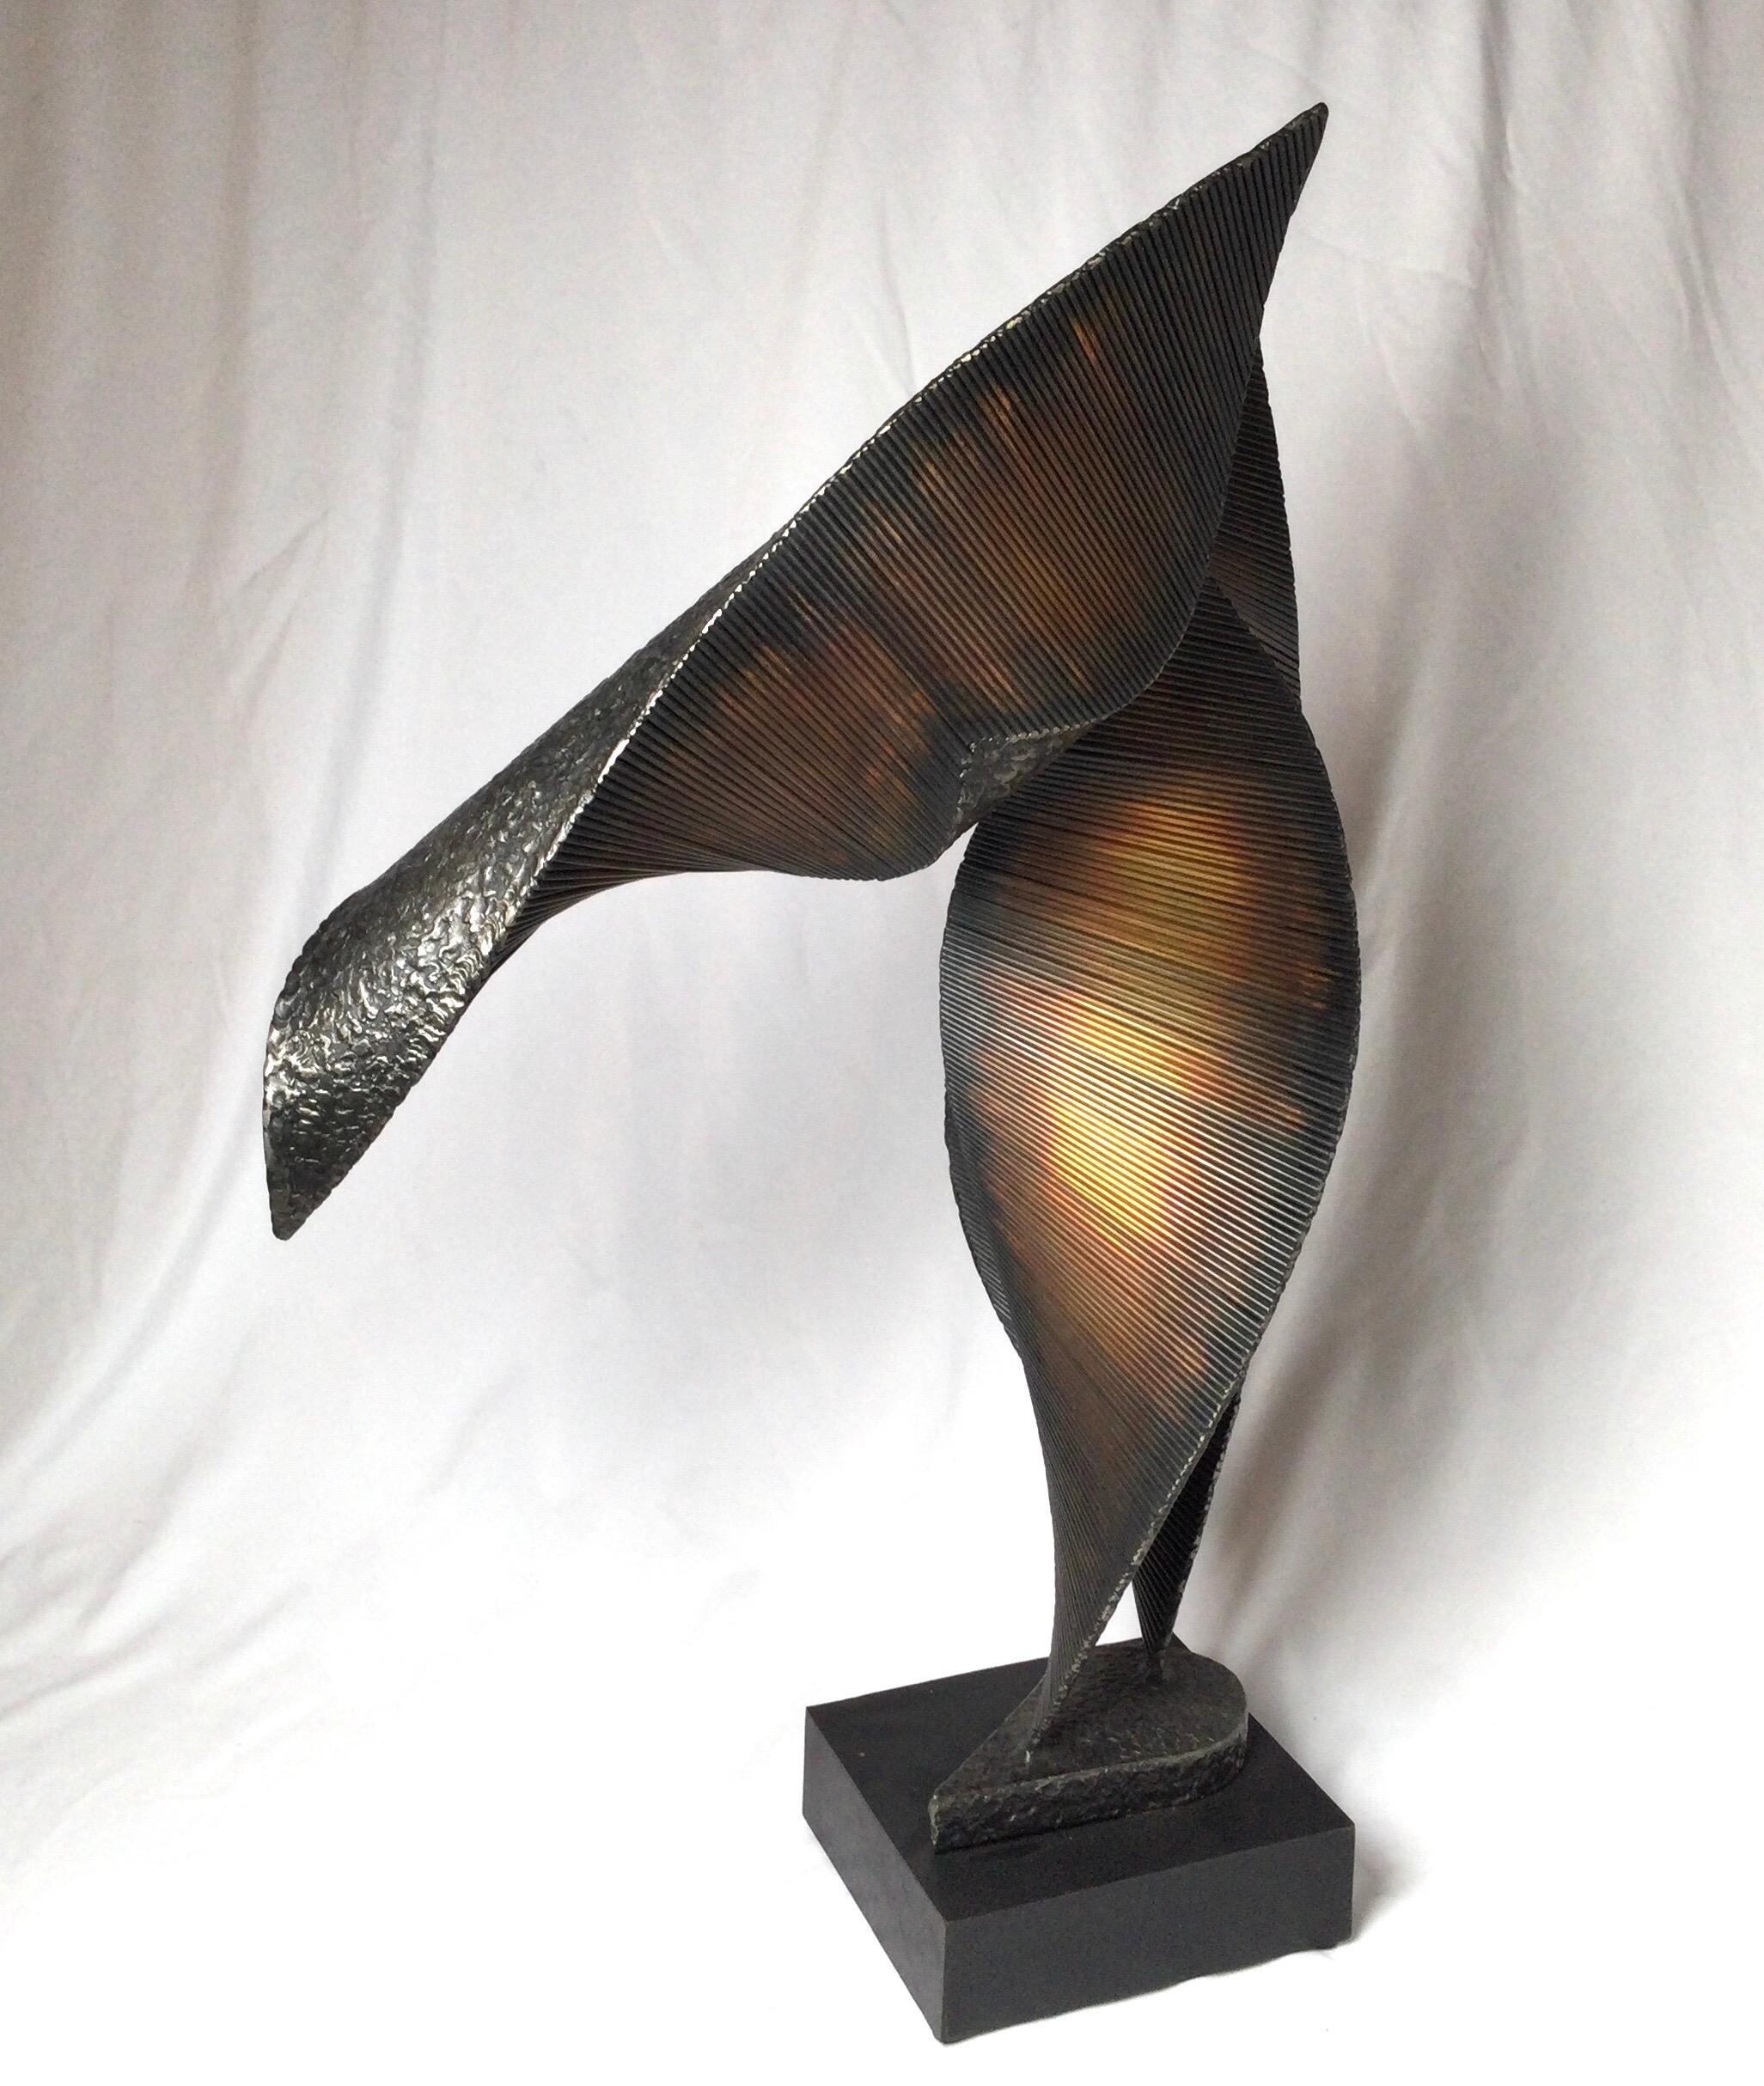 20th Century Modern Brutalist Abstract Metal Sculpture Signed Roper